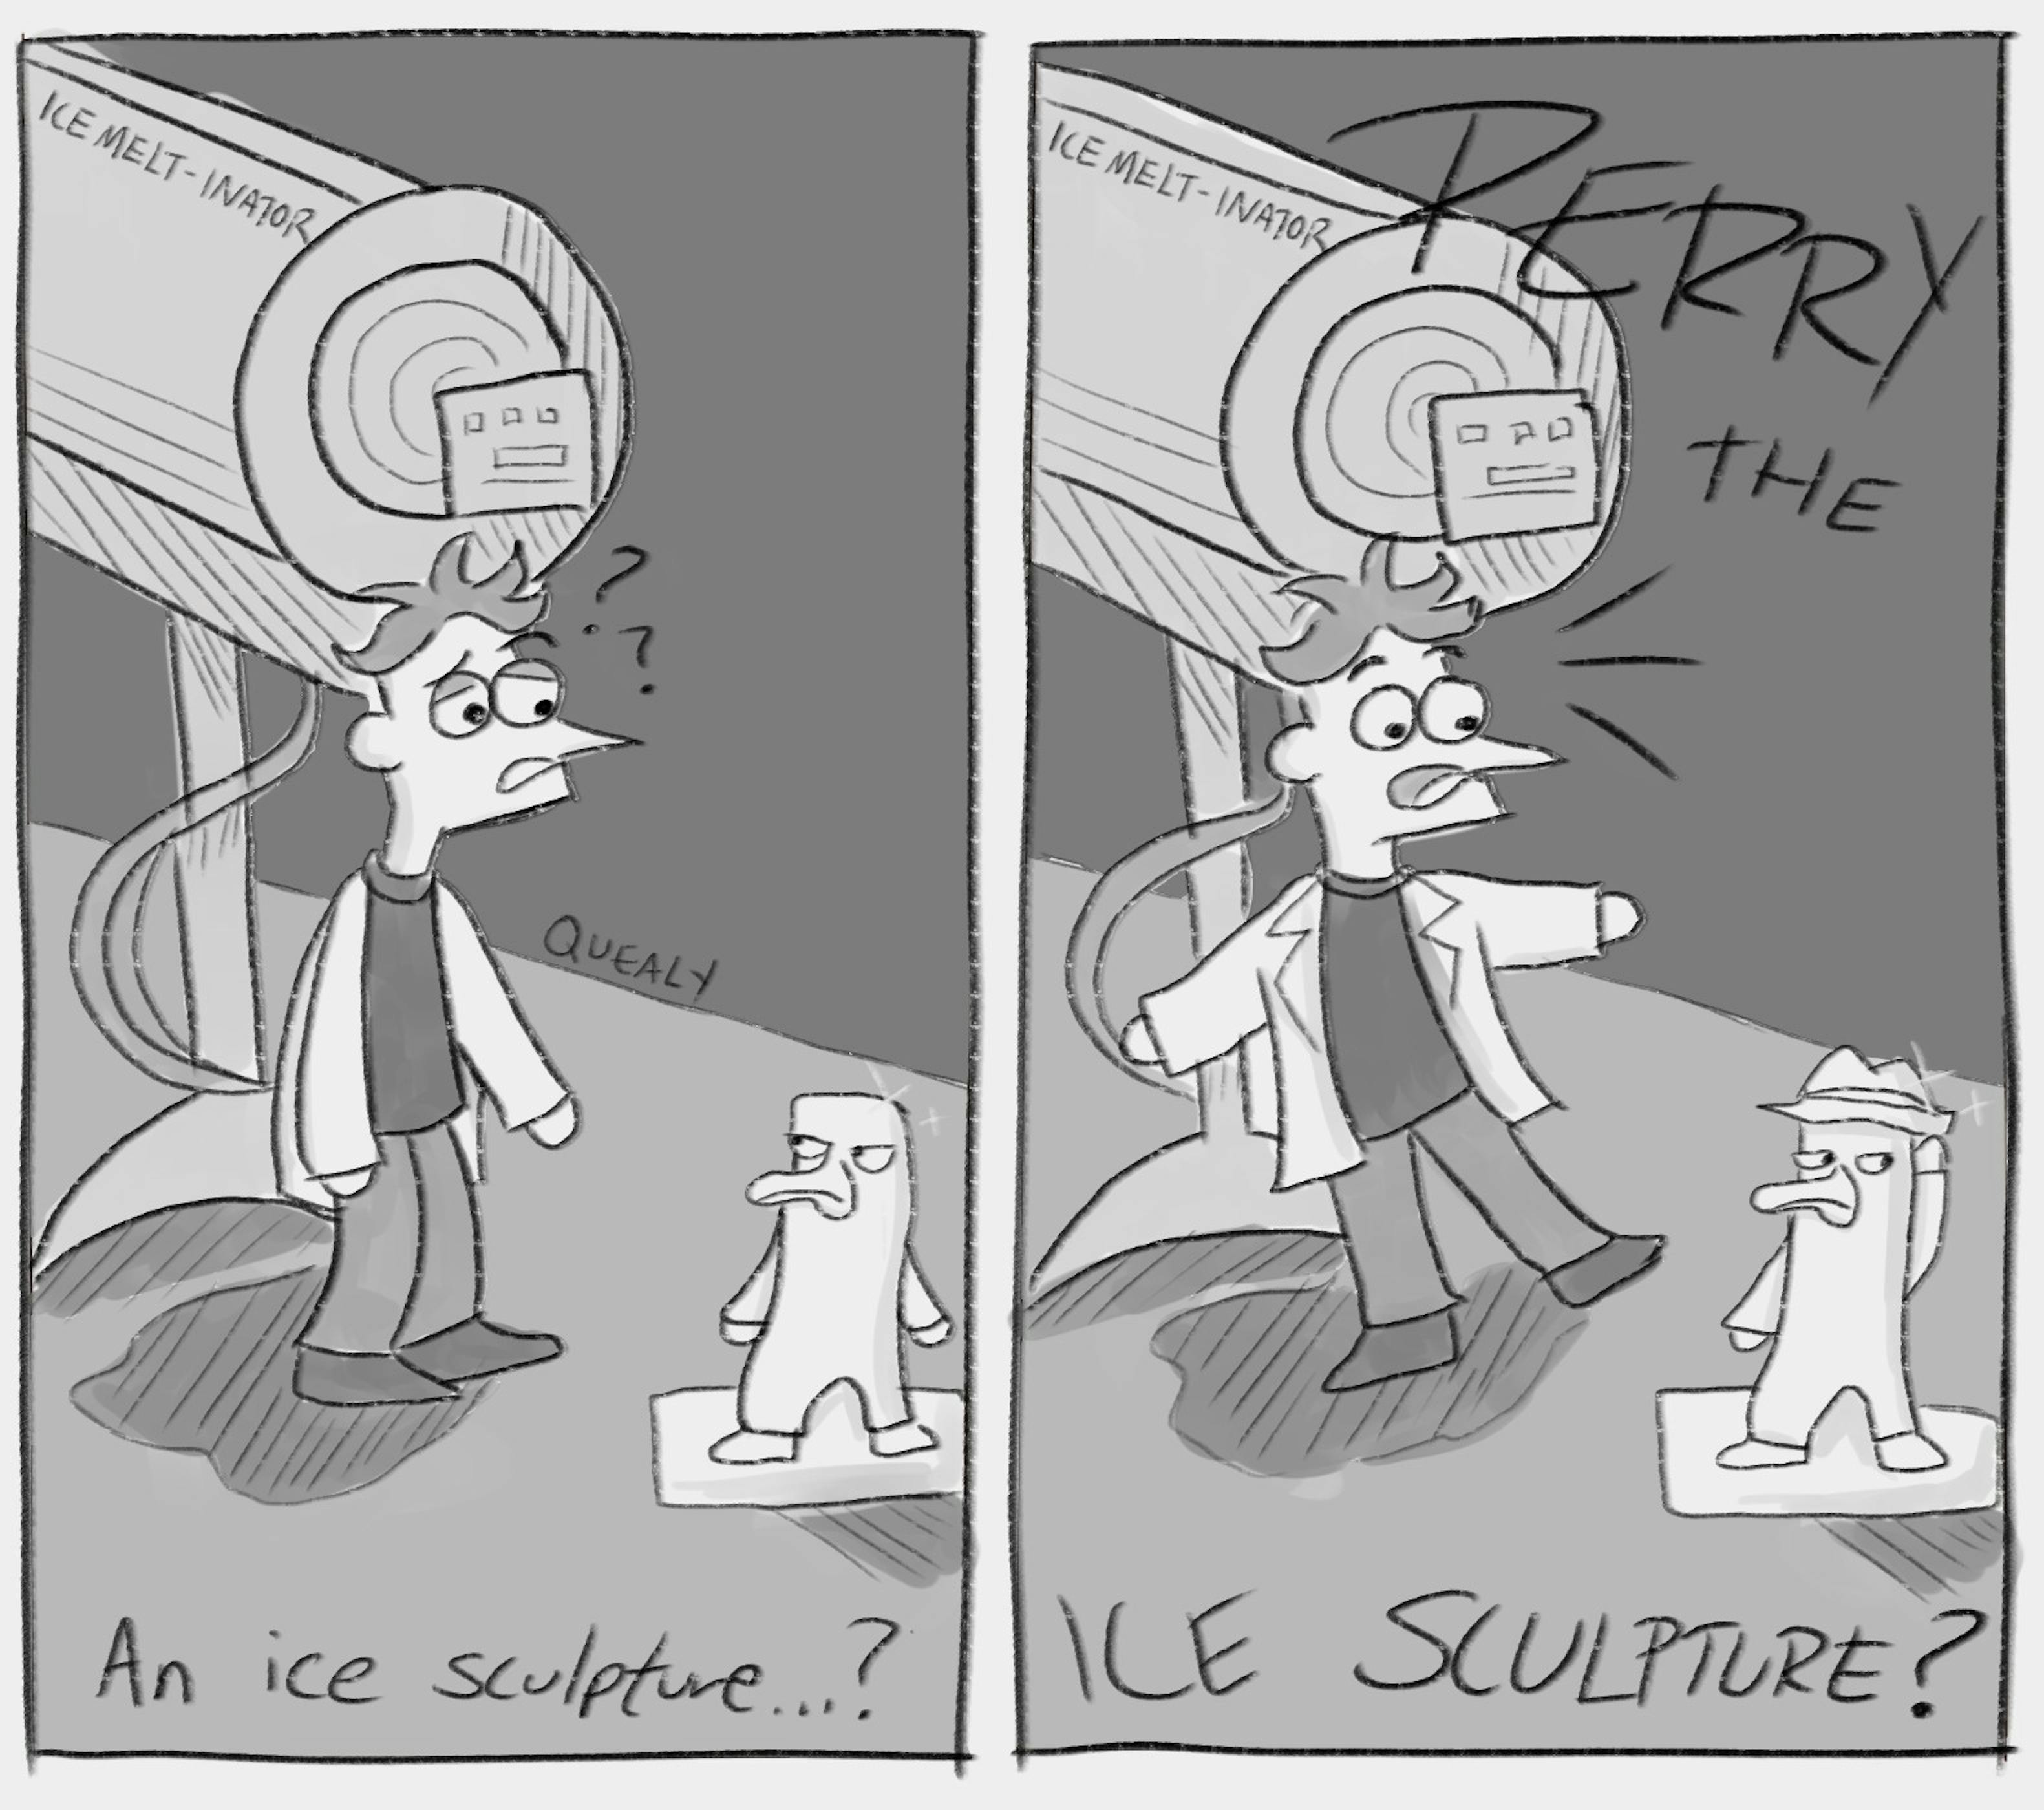 perry-the-ice-sculputre